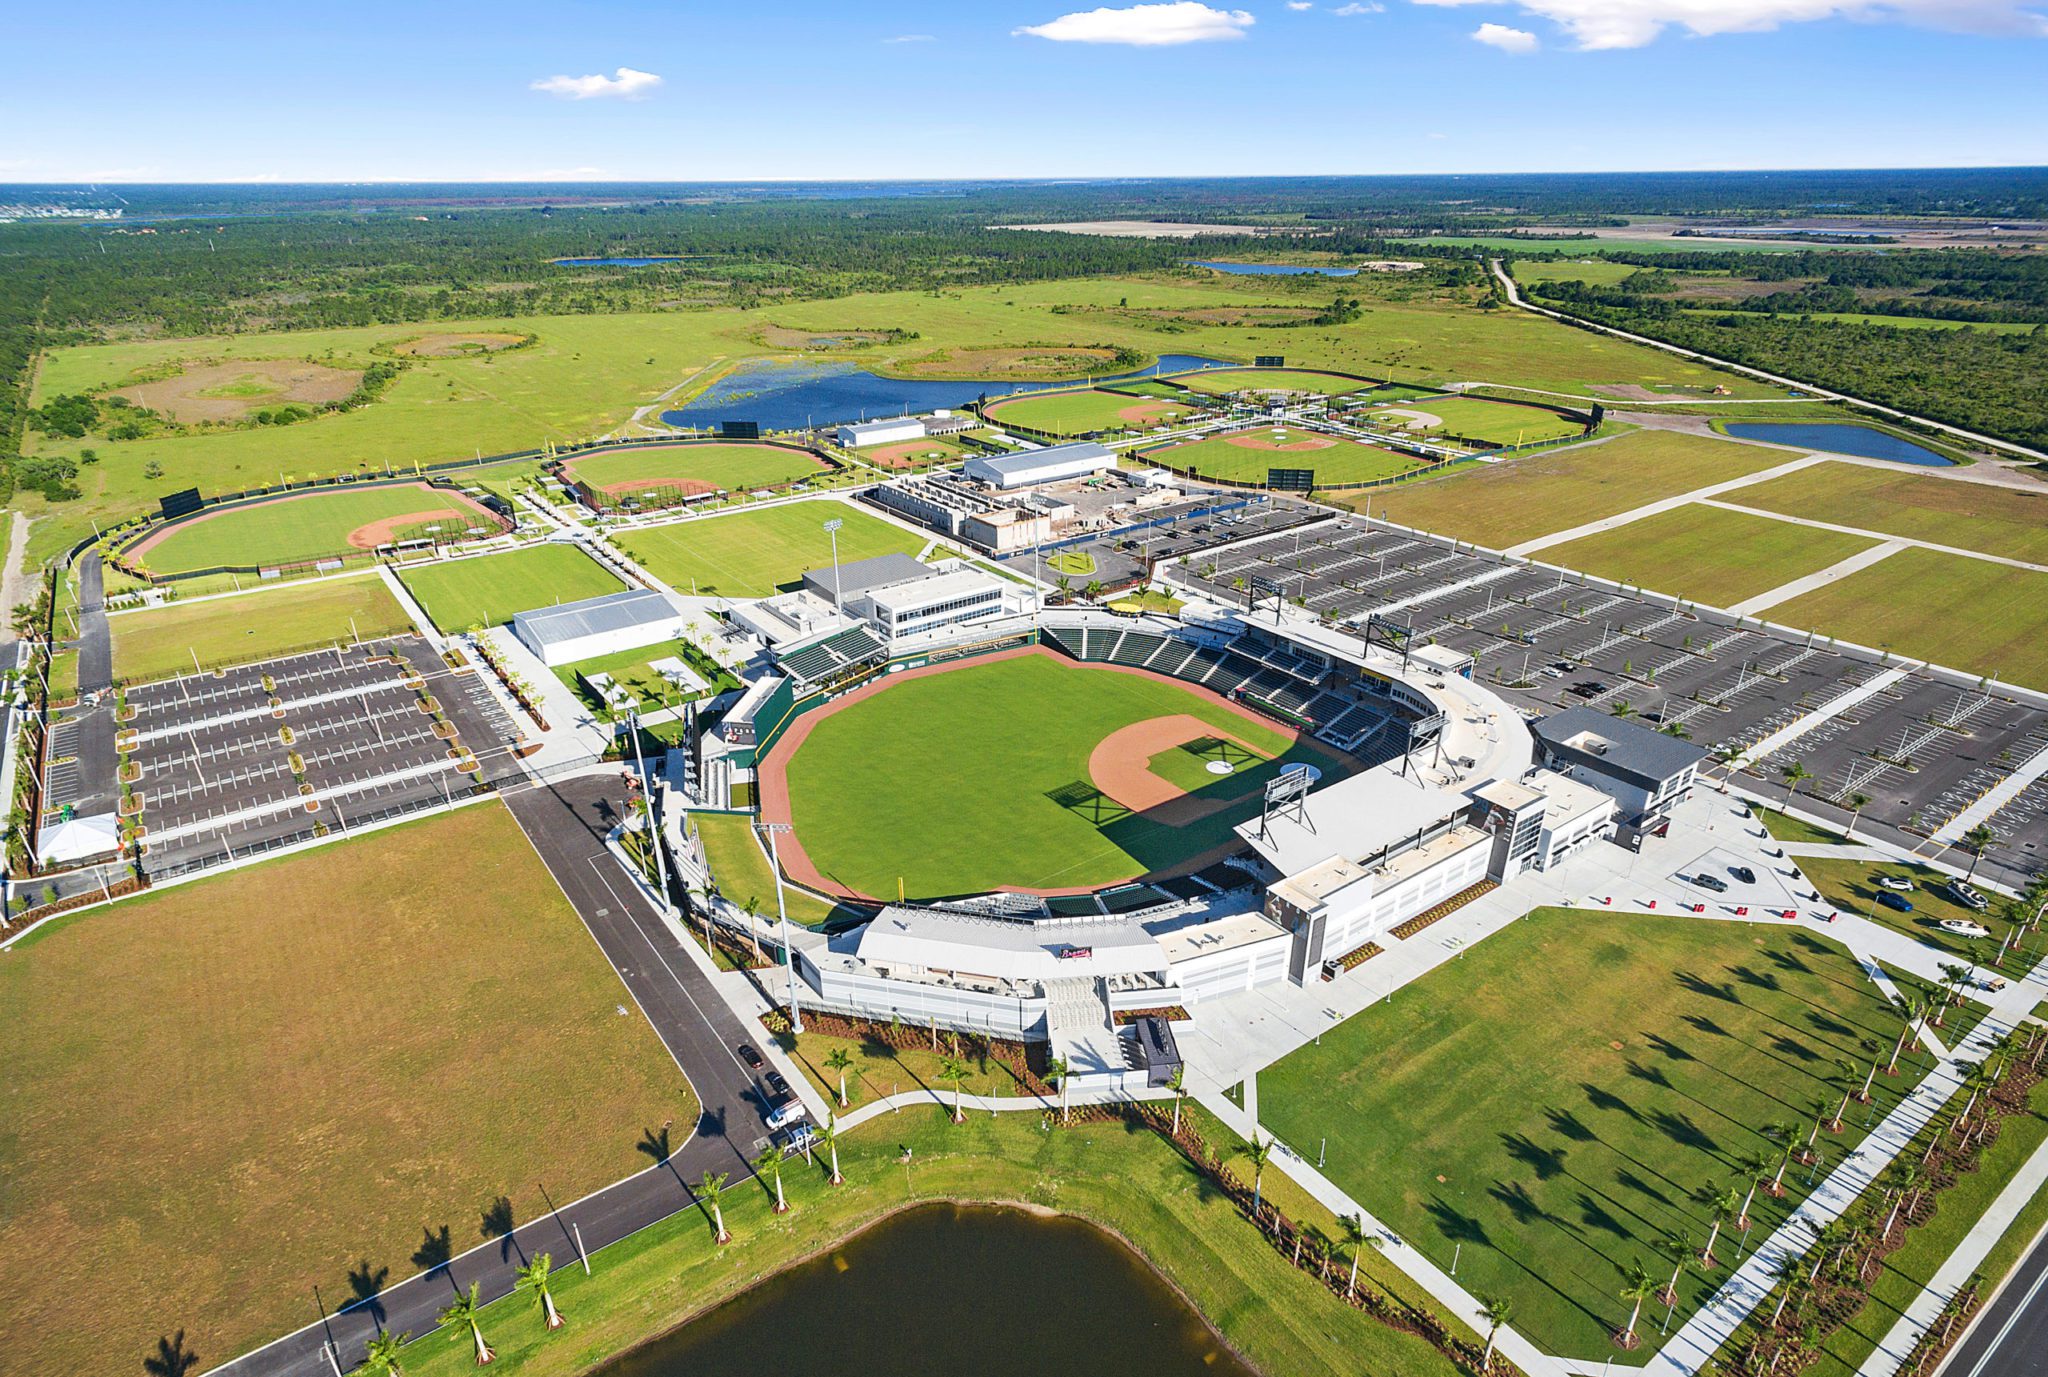 Aerial view of the entire Atlanta Braves Spring Training Facility complex at CoolToday Park